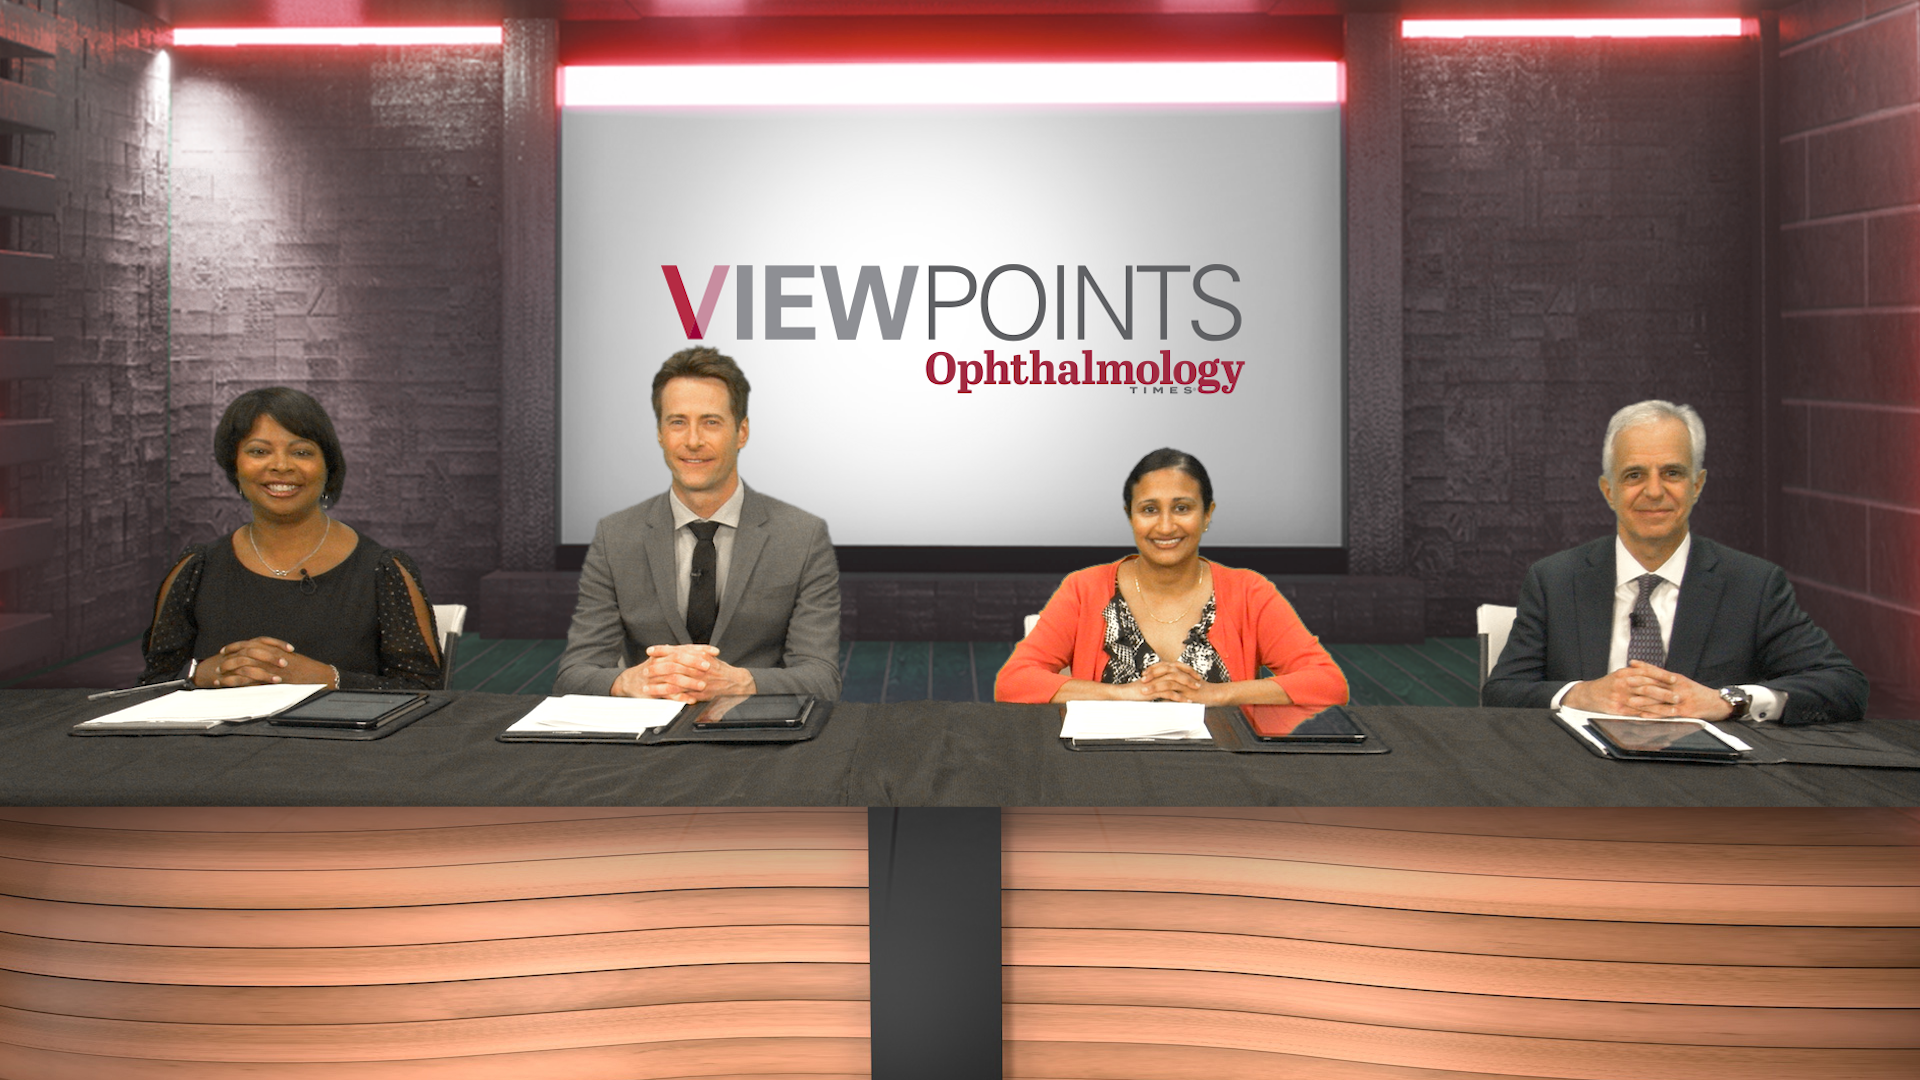 Key Takeaways on Managing Neovascular AMD and DME